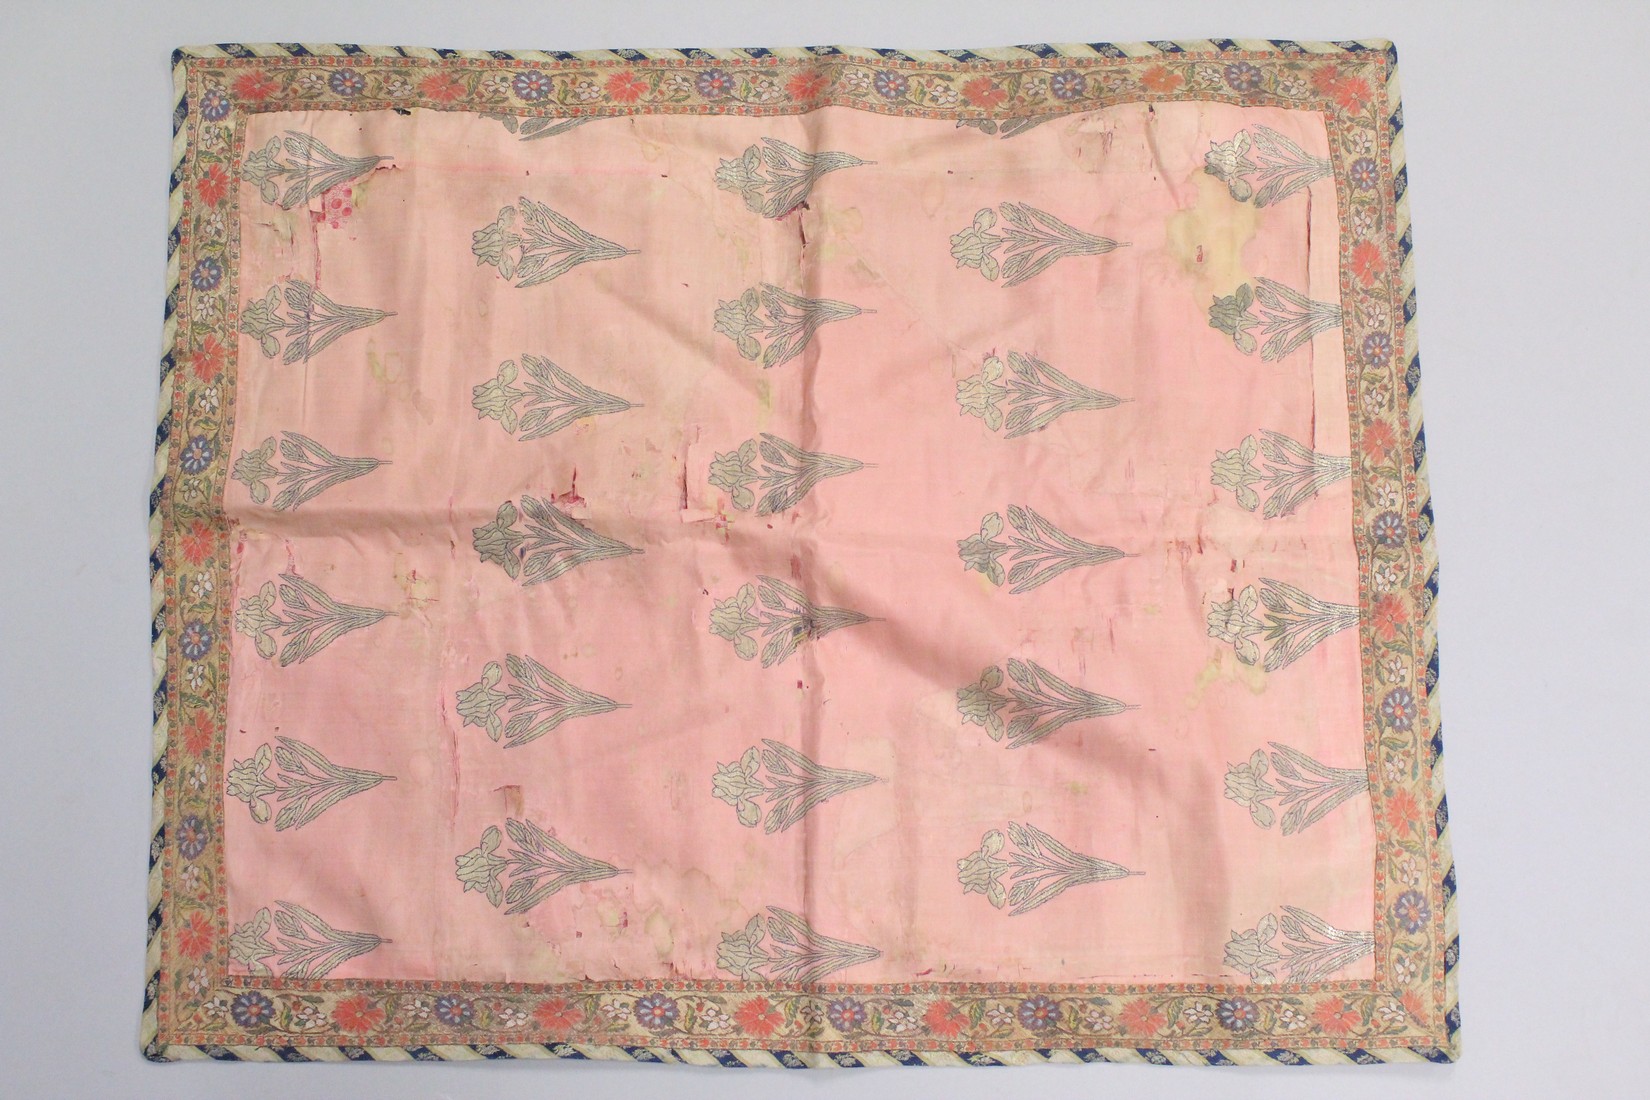 A SAFAVID EMBROIDERED SILK TEXTILE, with decorative floral motifs, 71cm x 58cm. - Image 3 of 4